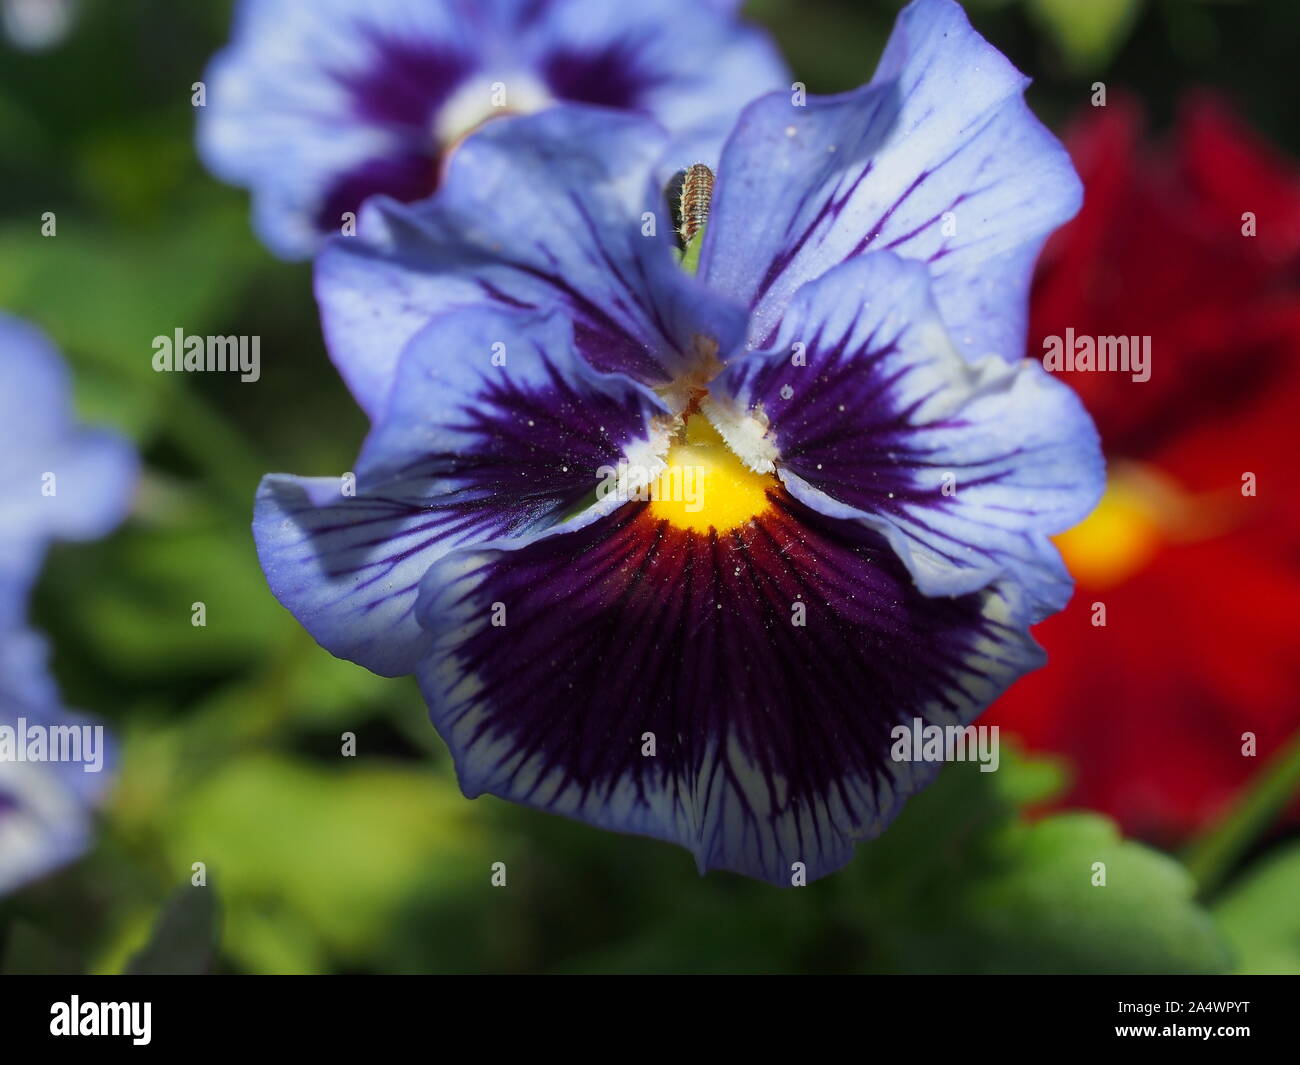 Pansy. The colorful petals of the flower buds. Garden flowers. Macrophoto. Stock Photo